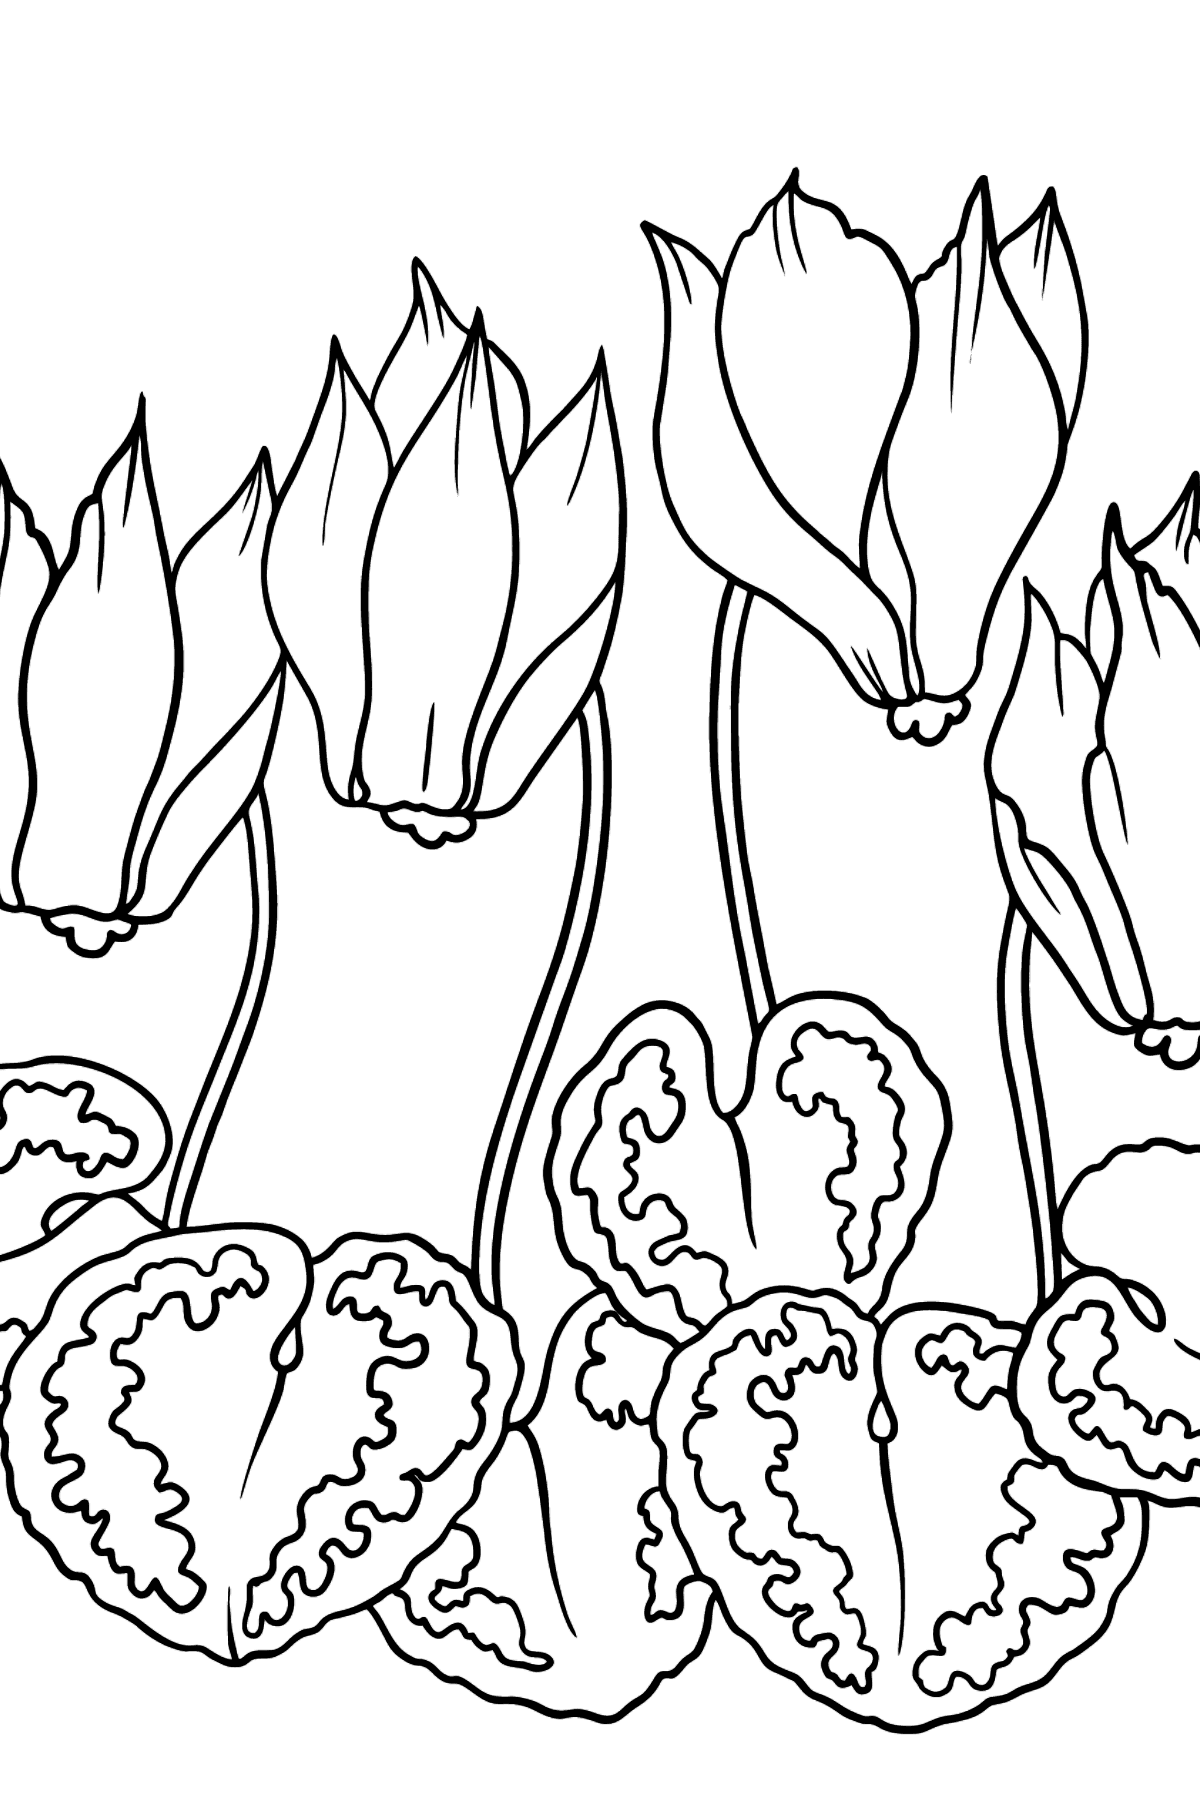 Coloring Page Red and Pink Cyclamen - Coloring Pages for Kids